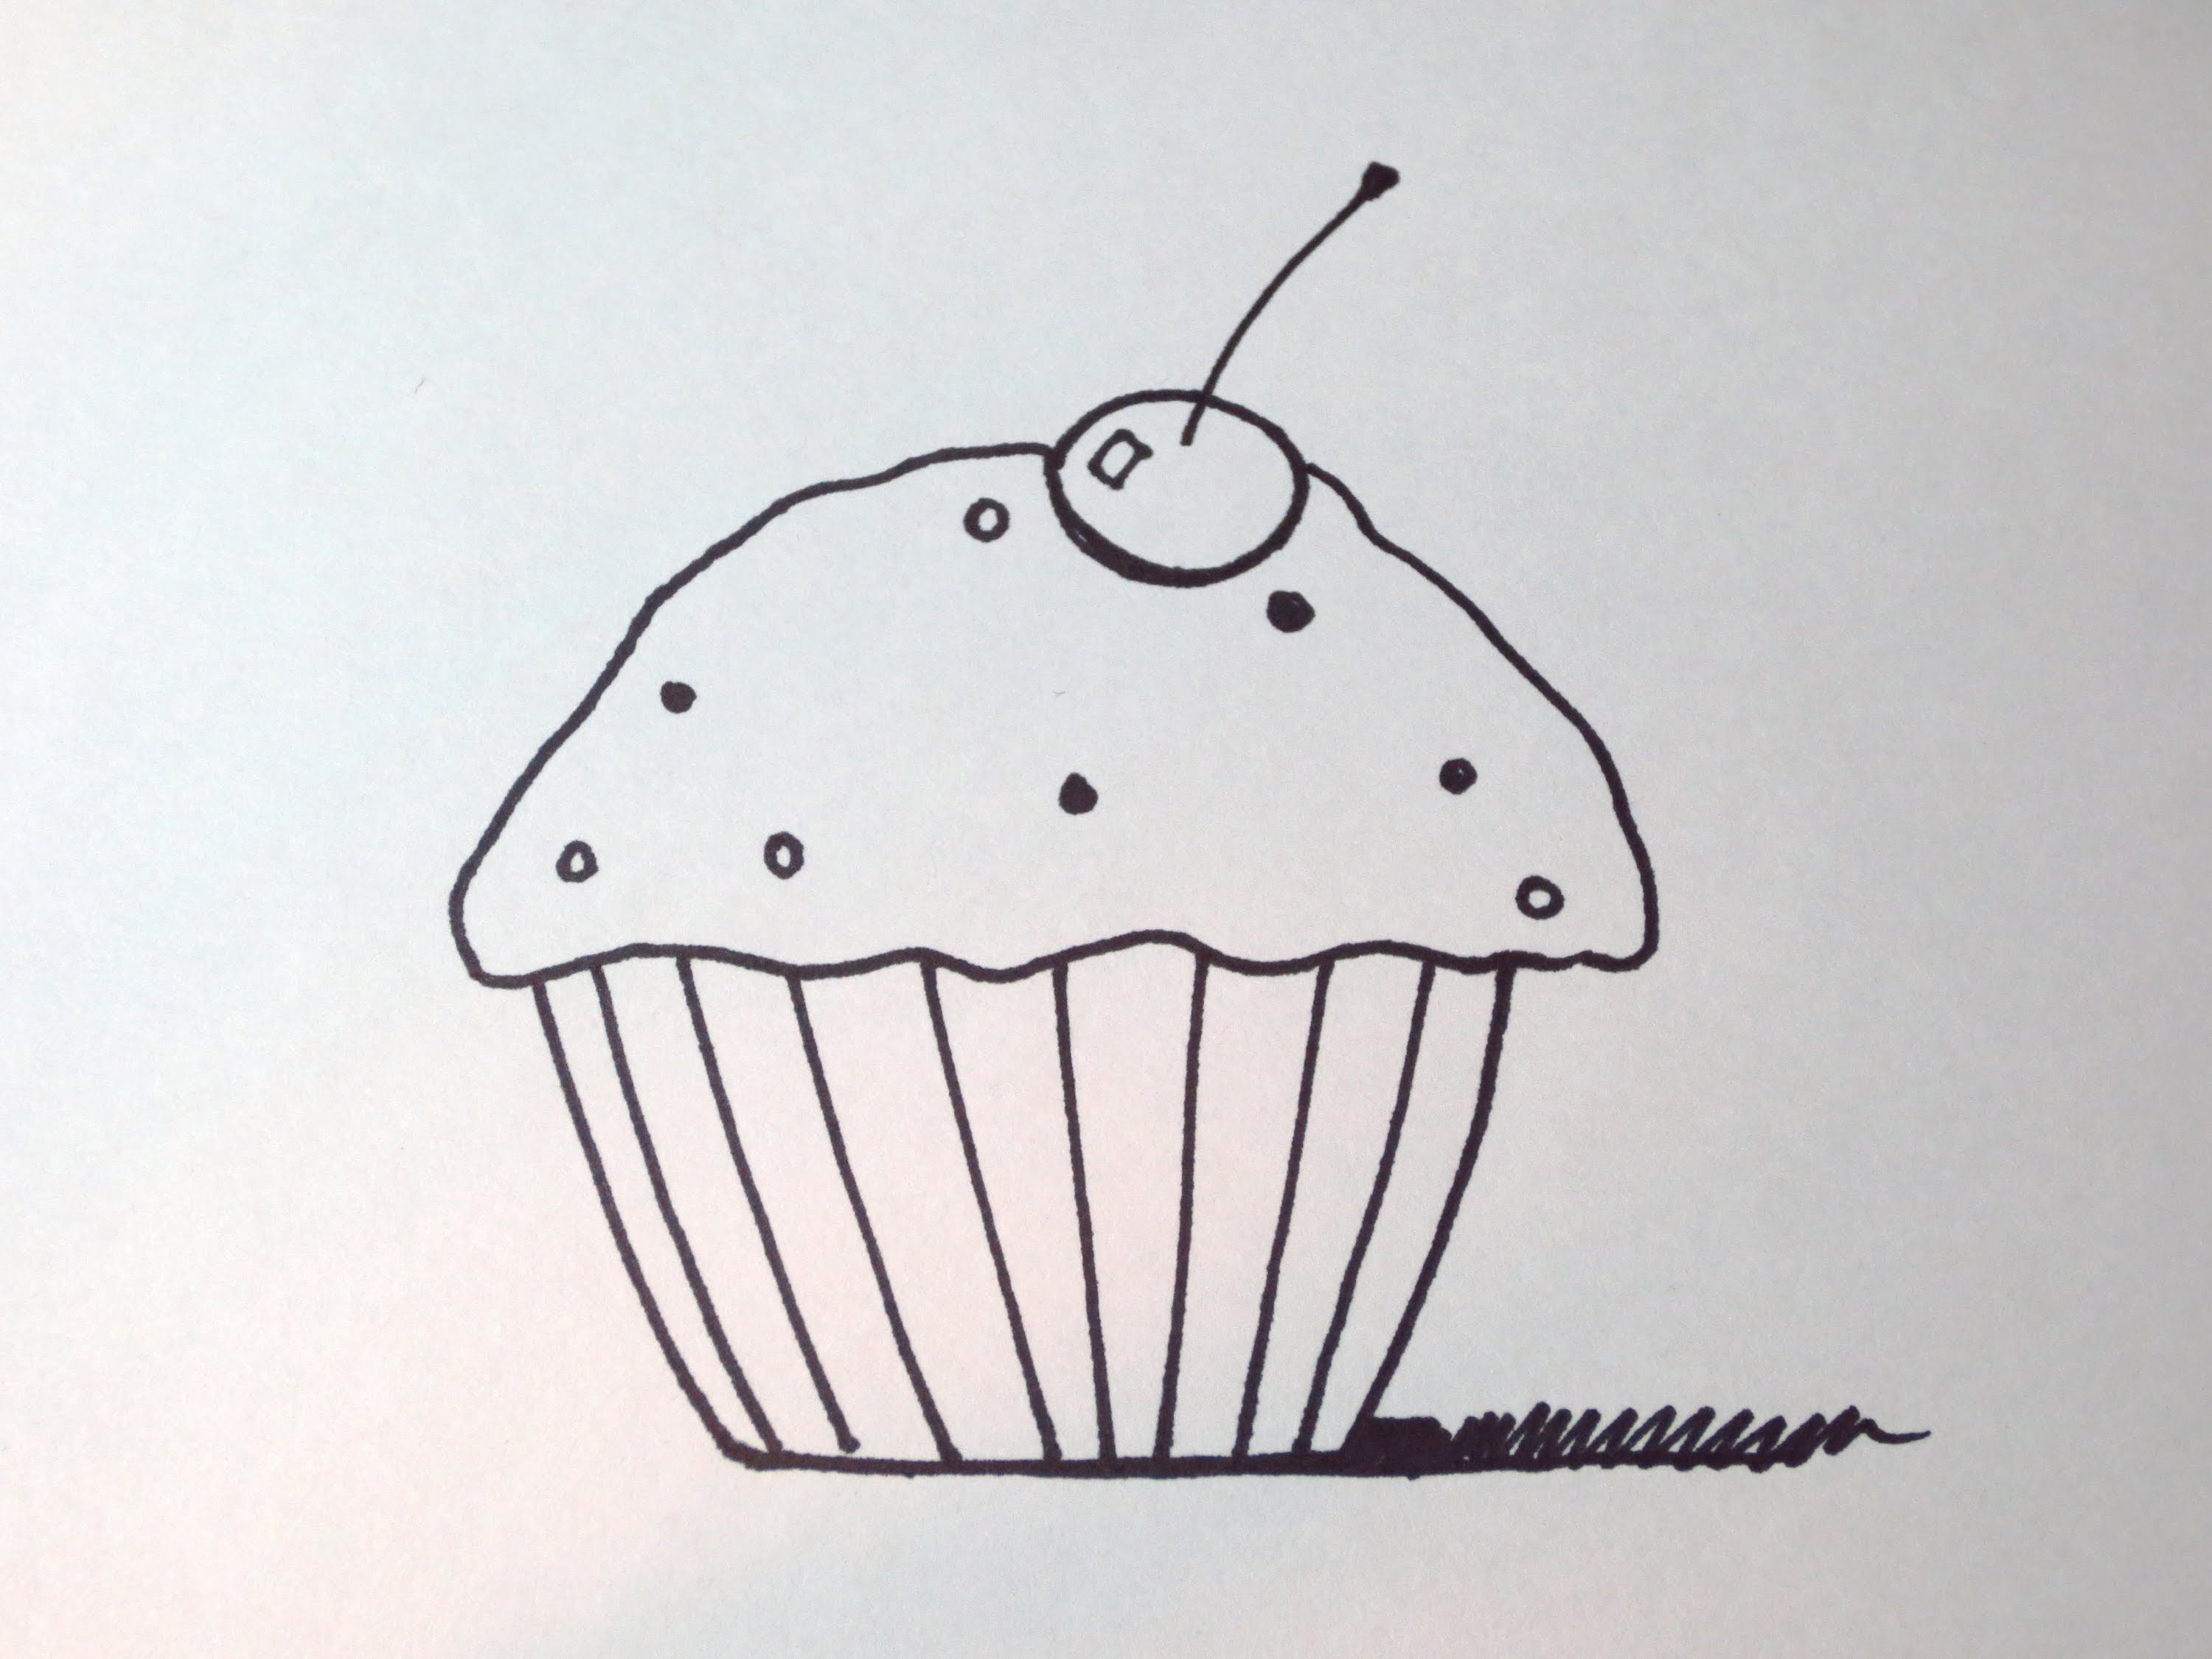 How To Draw A Cartoon Cupcake (Simple and Easy) - YouTube